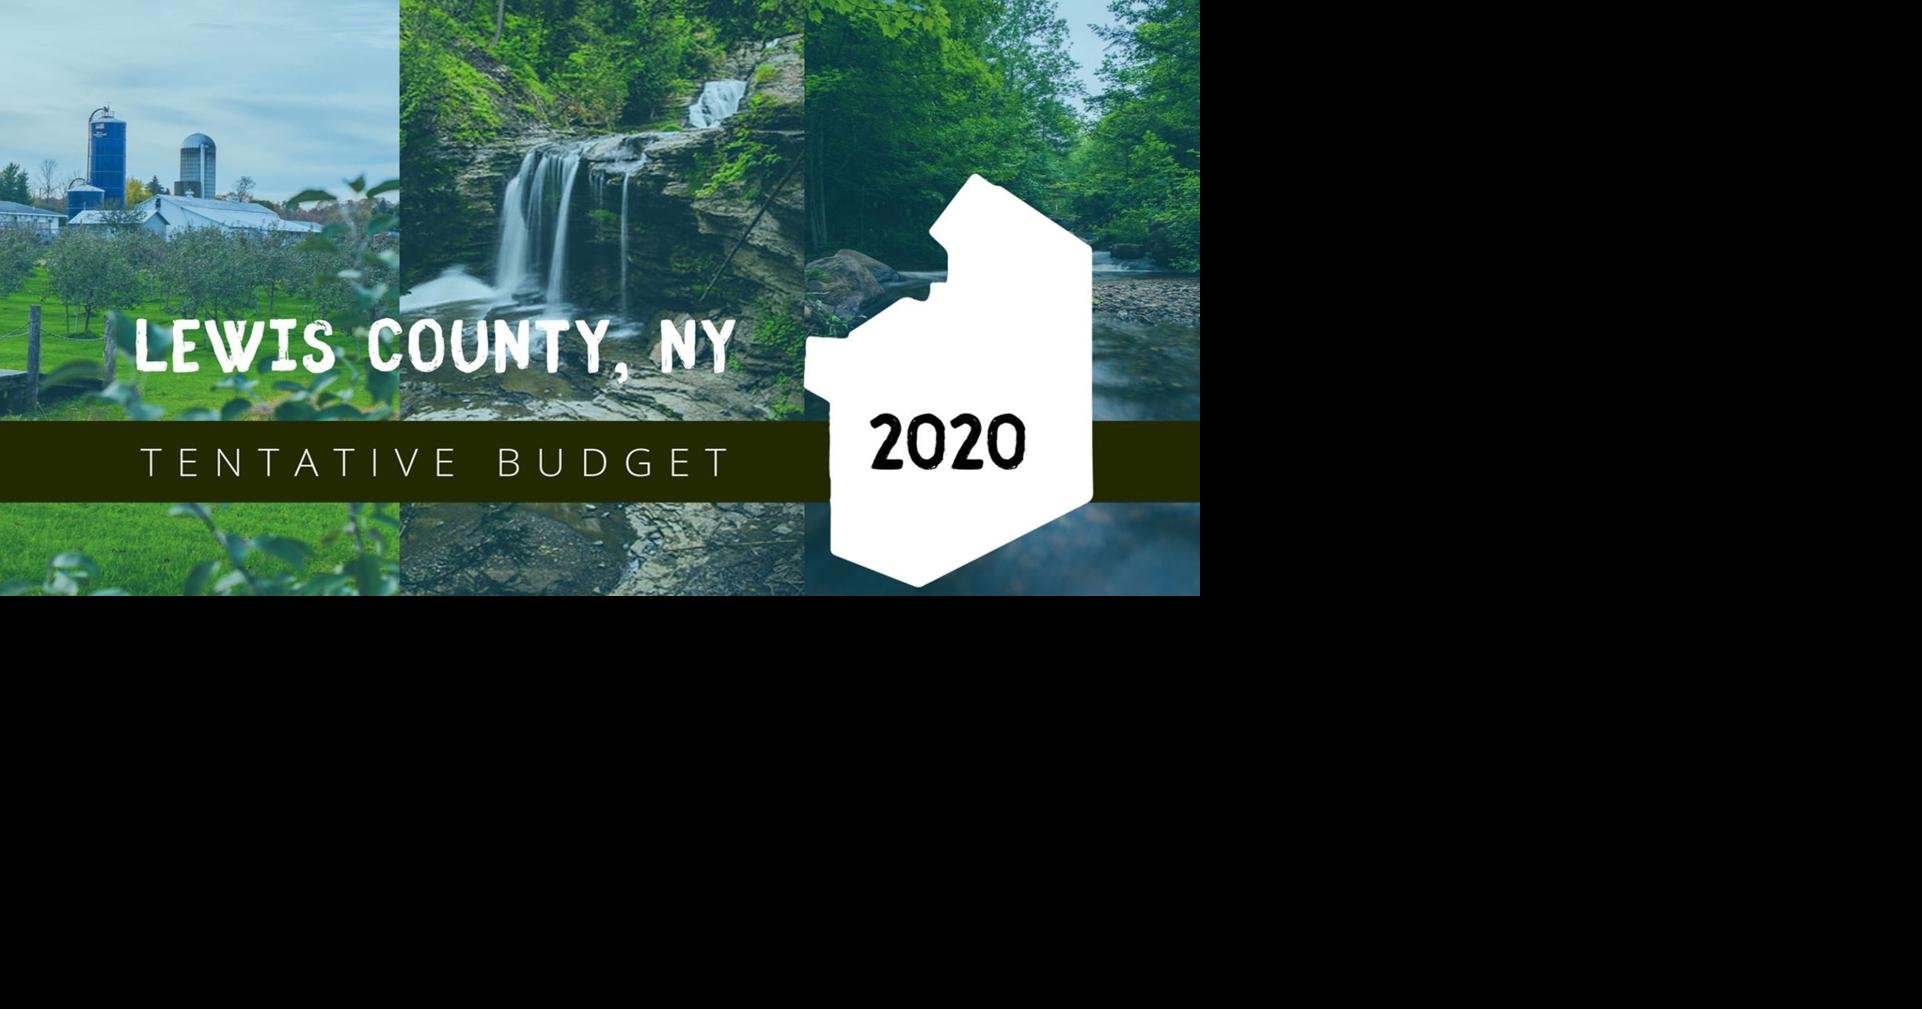 2020 draft tentative budget keeps Lewis County taxes stable Lewis